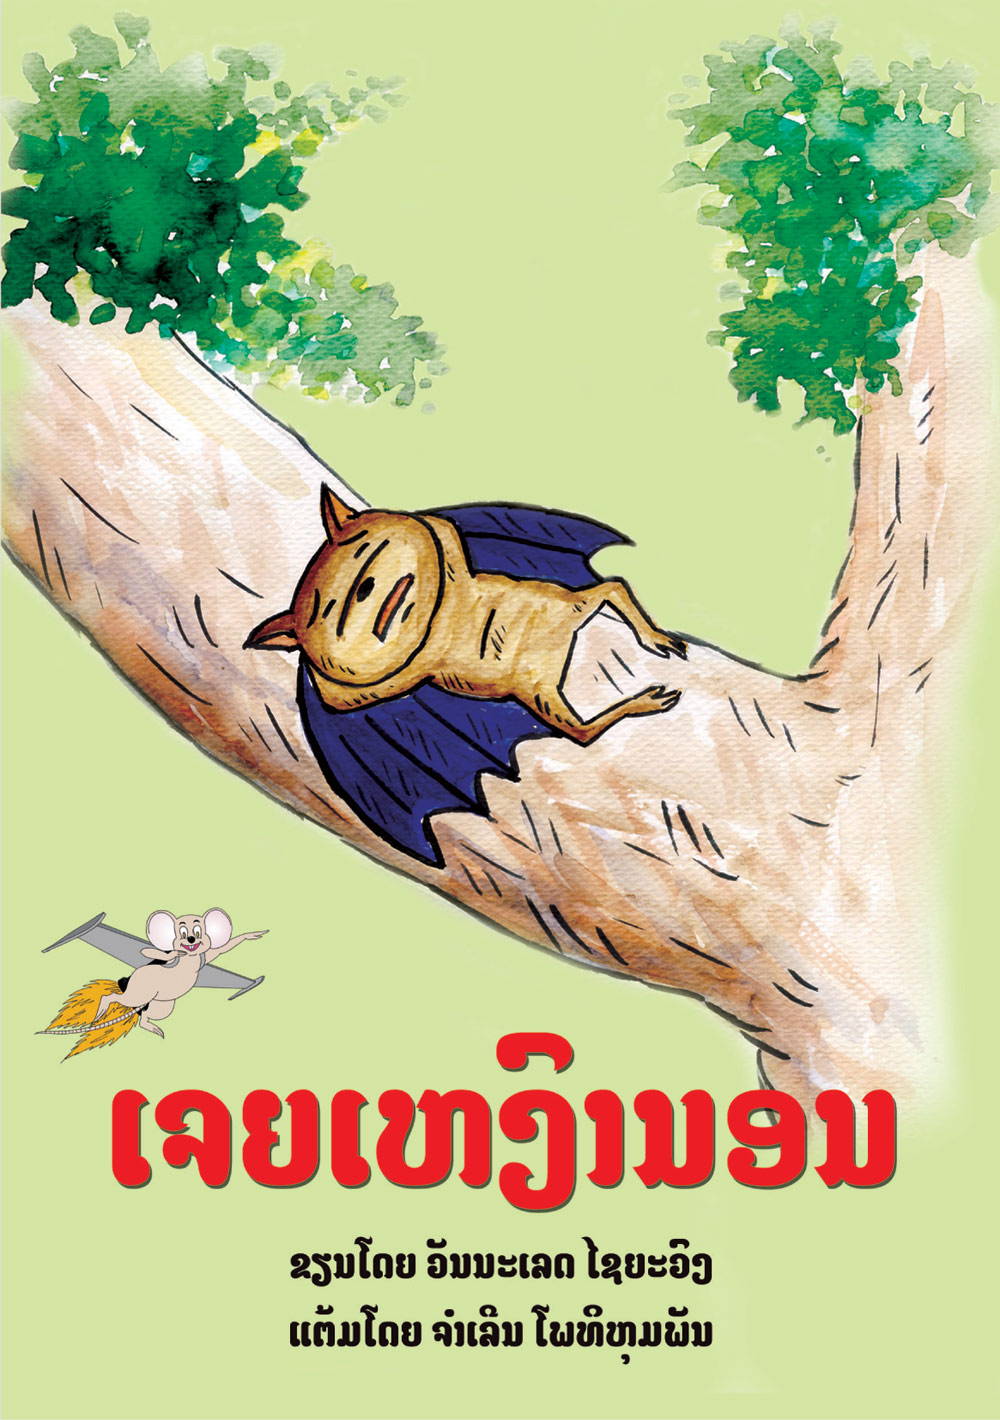 The Sleepy Bat large book cover, published in Lao language